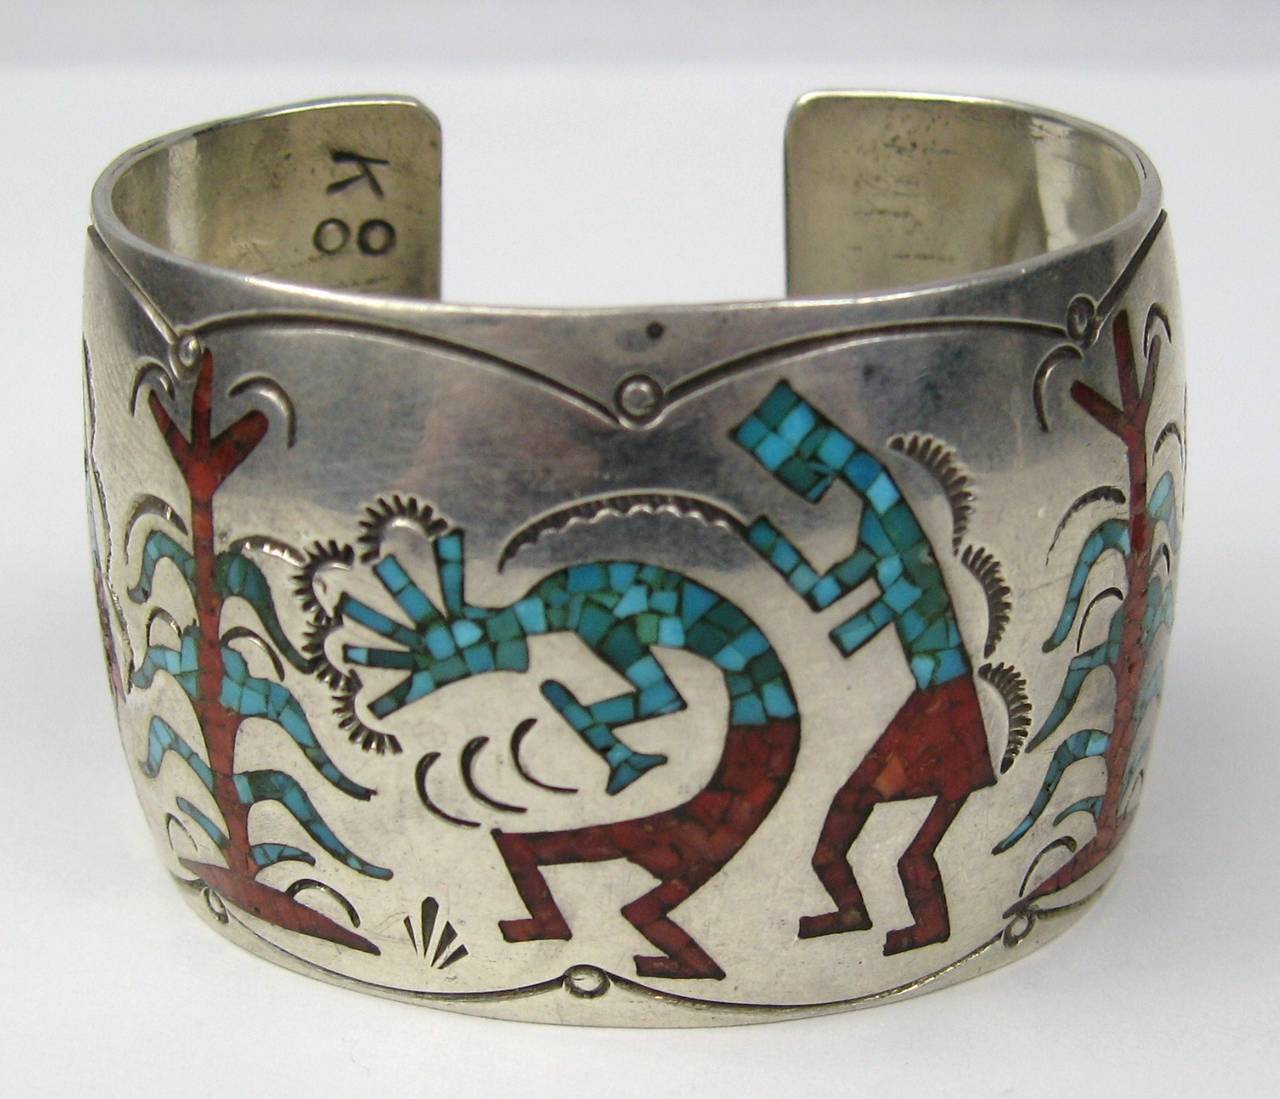 Inlaid Coral and Turquoise native American sterling silver bracelet. Measures 1.57 in wide. Hallmarked inside bracelet. Will fit a 6-7 inch wrist. This is out of a massive collection of Hopi, Zuni, Navajo, Southwestern, sterling silver, (costume